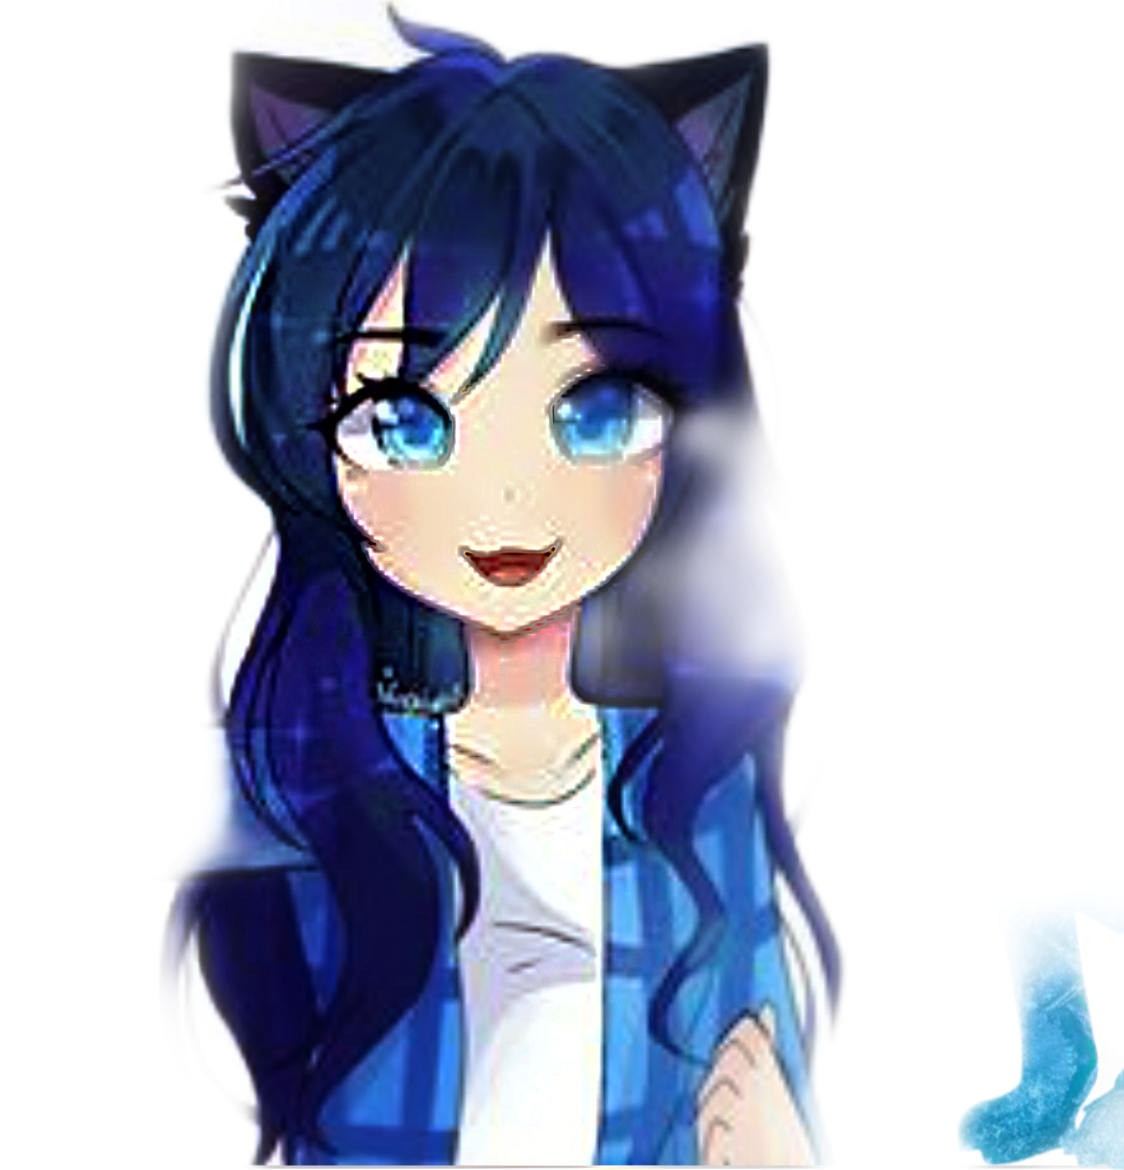 funneh freetoedit #funneh sticker by @yialor9